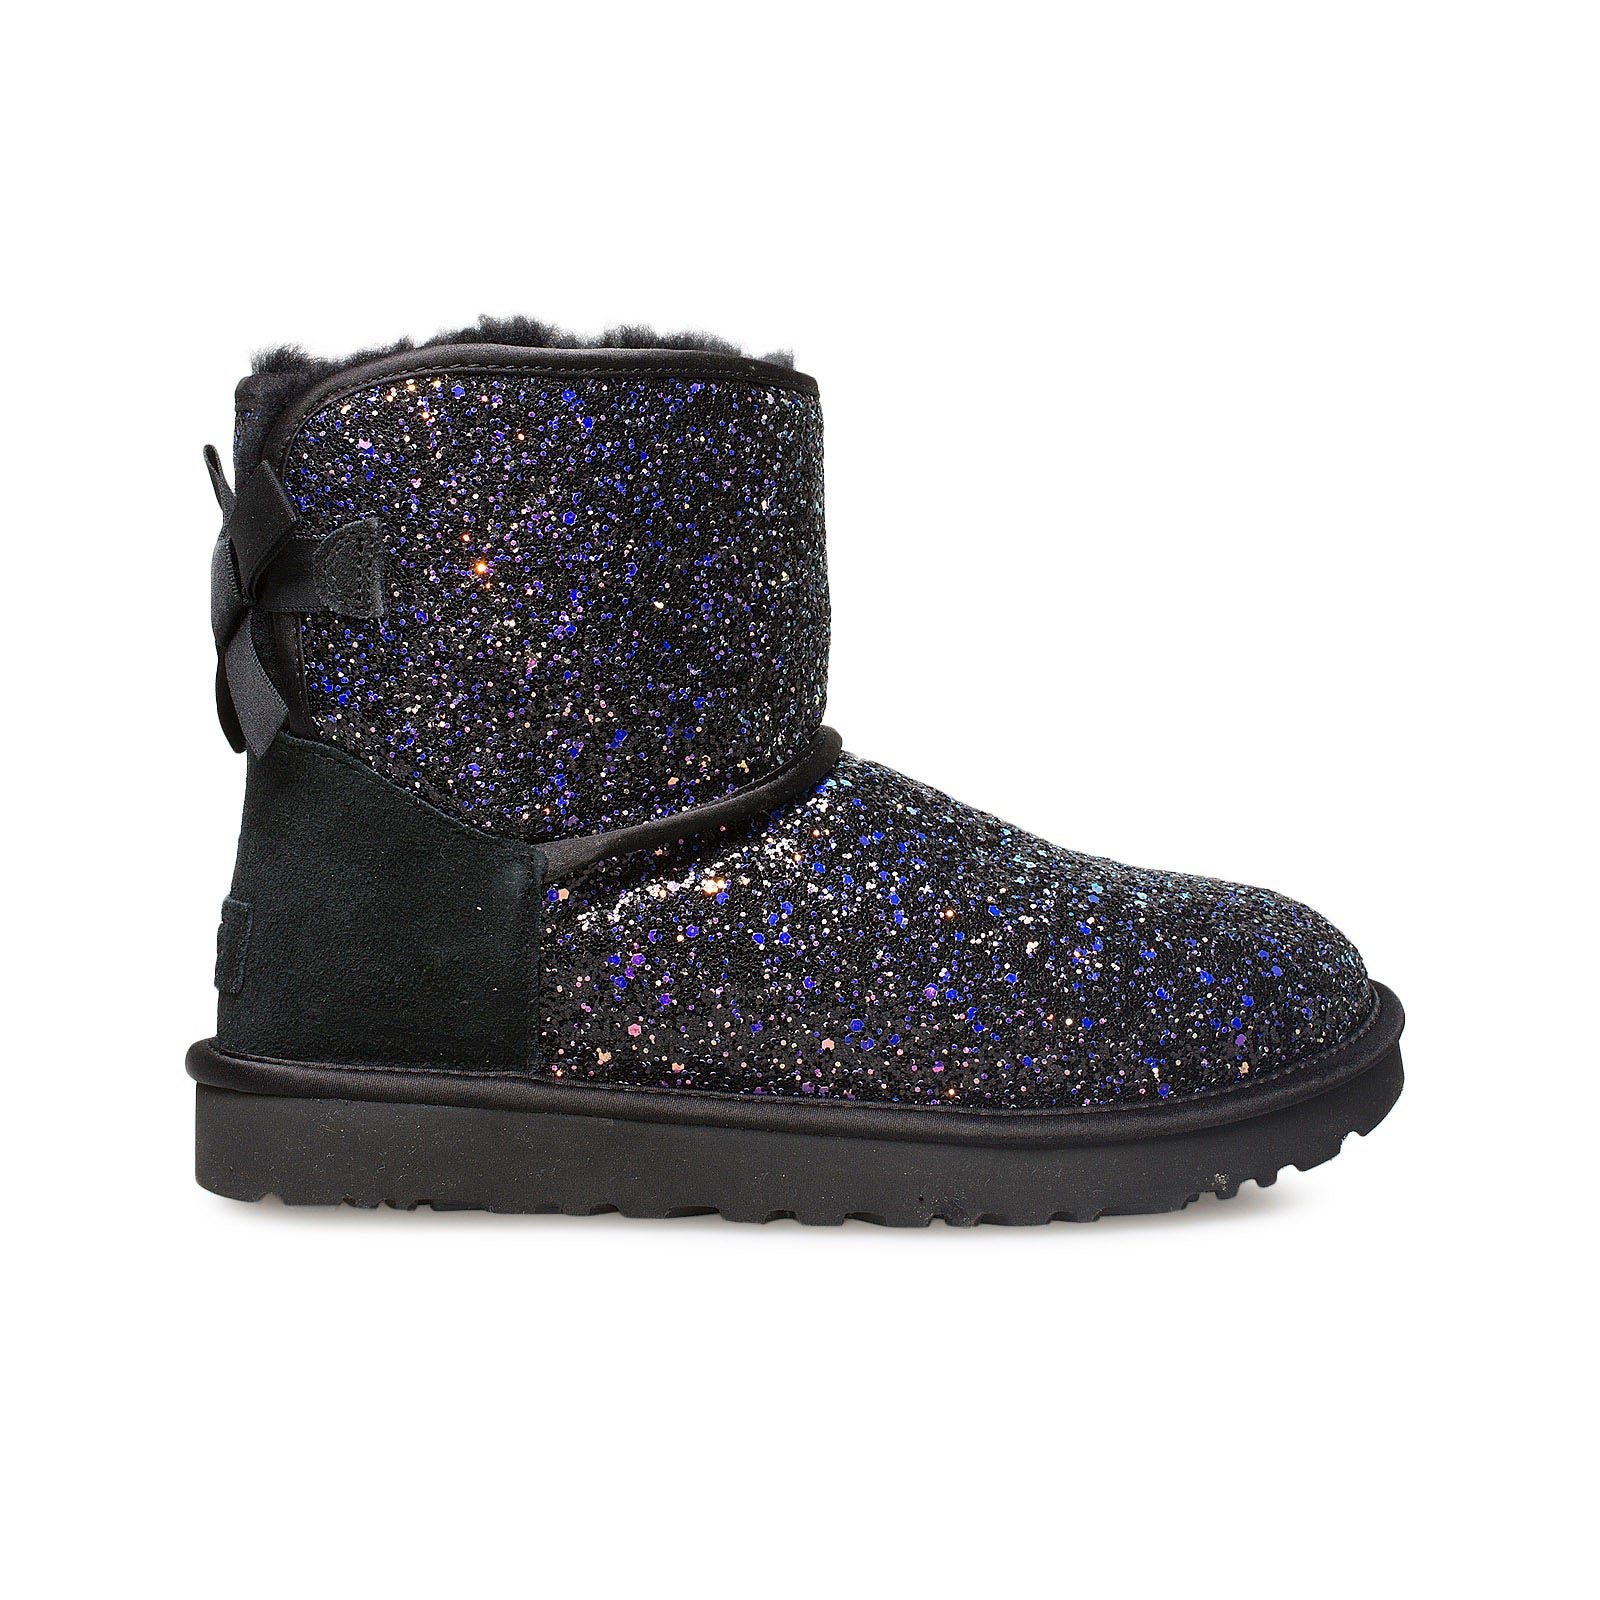 UGG Classic Mini Bow Cosmos Black Boots - Women's – MyCozyBoots